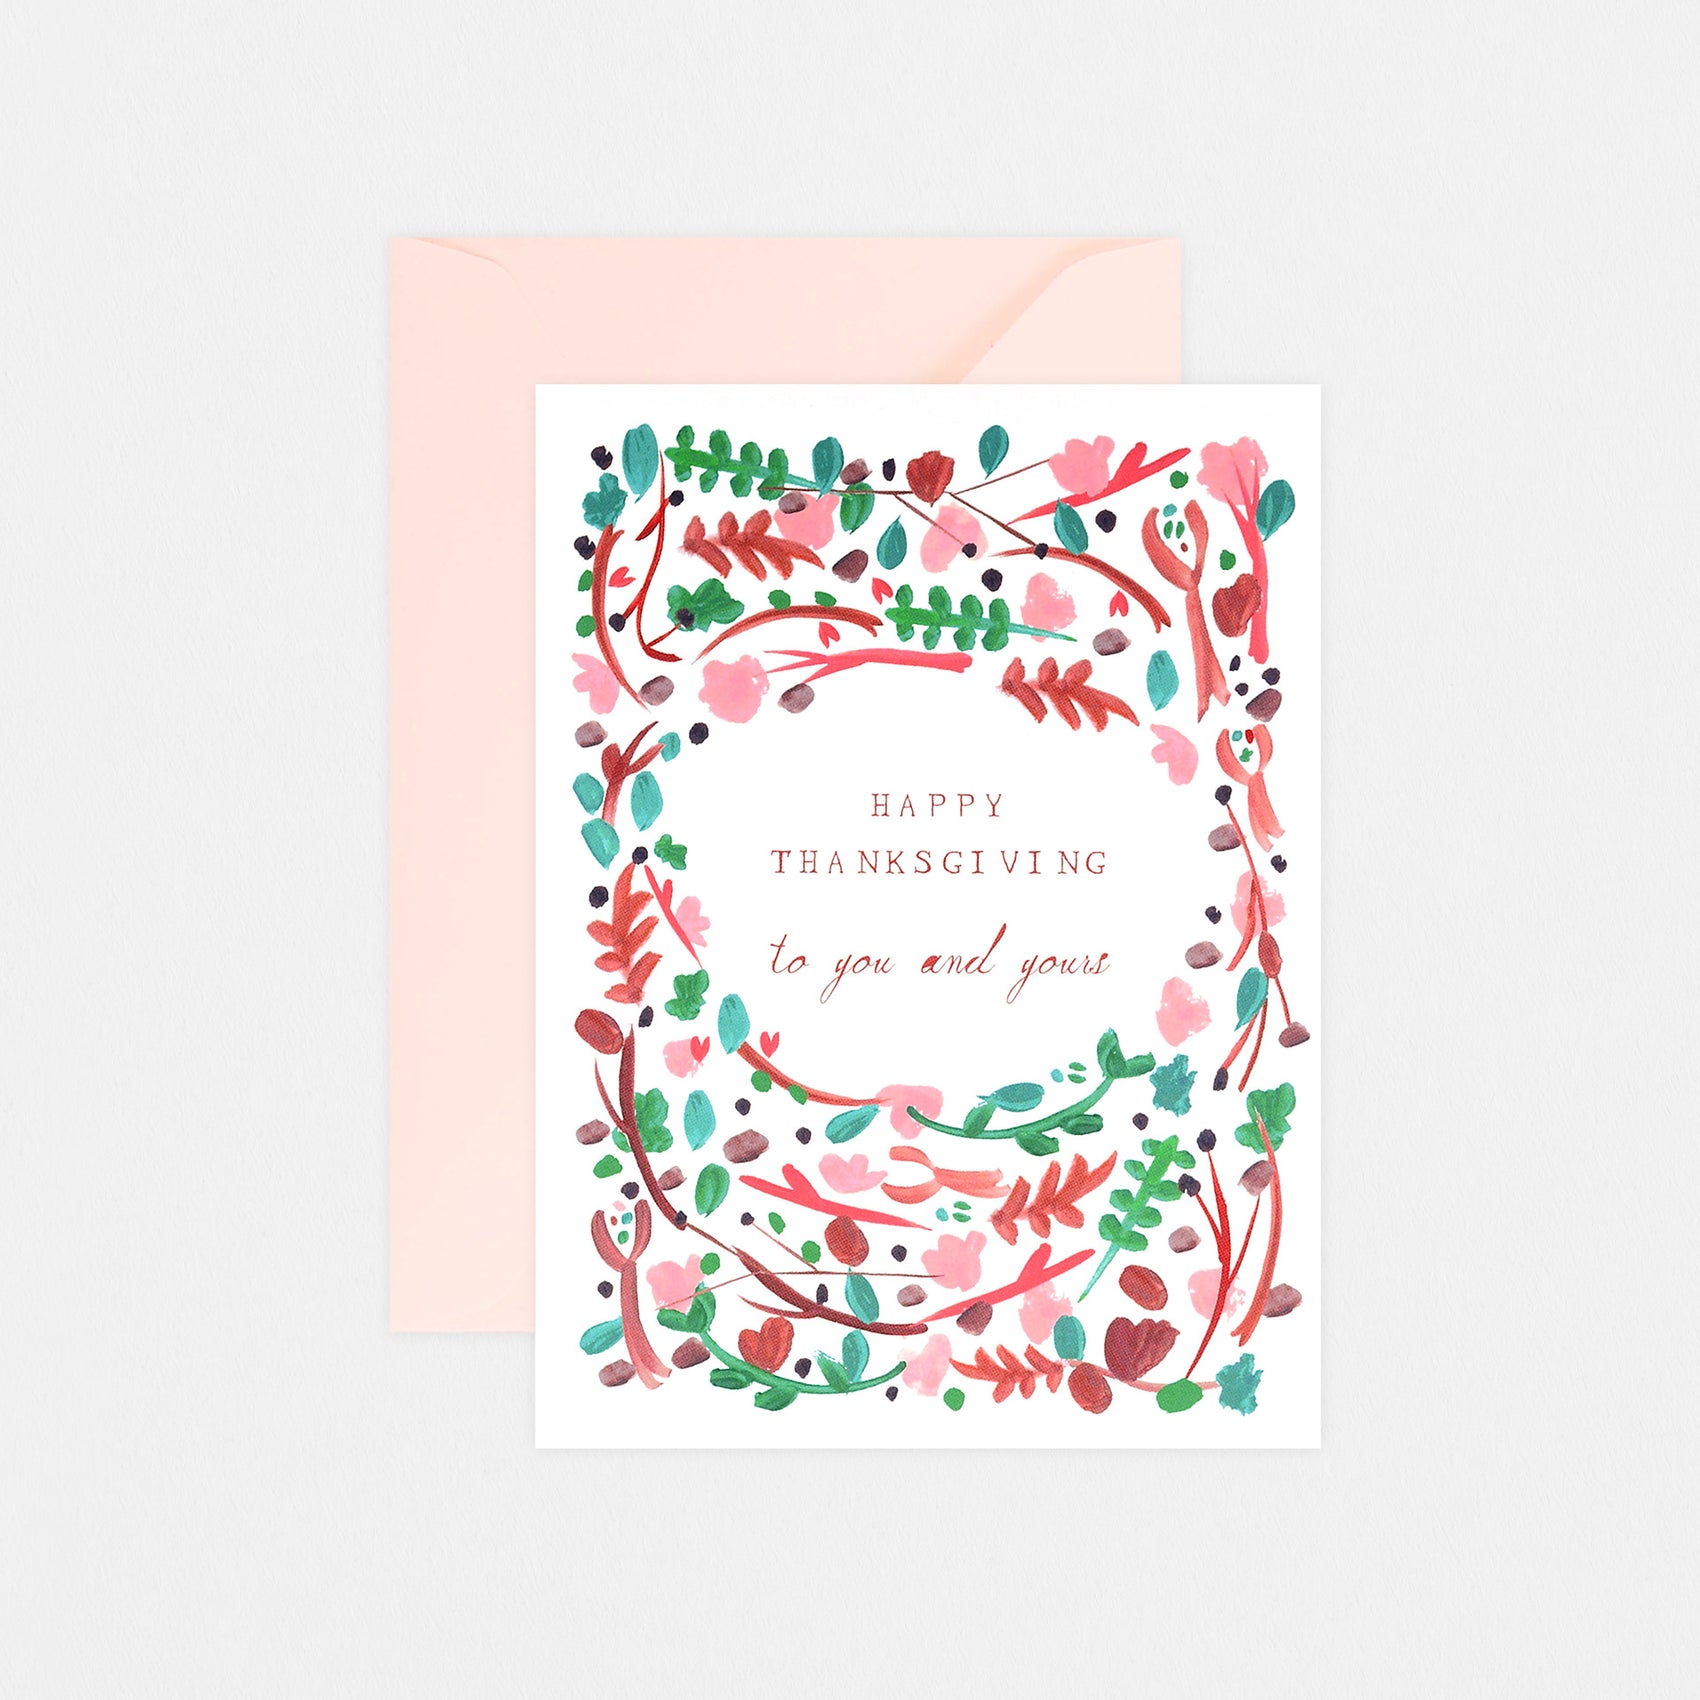 The Floral Wreath Thanksgiving Card